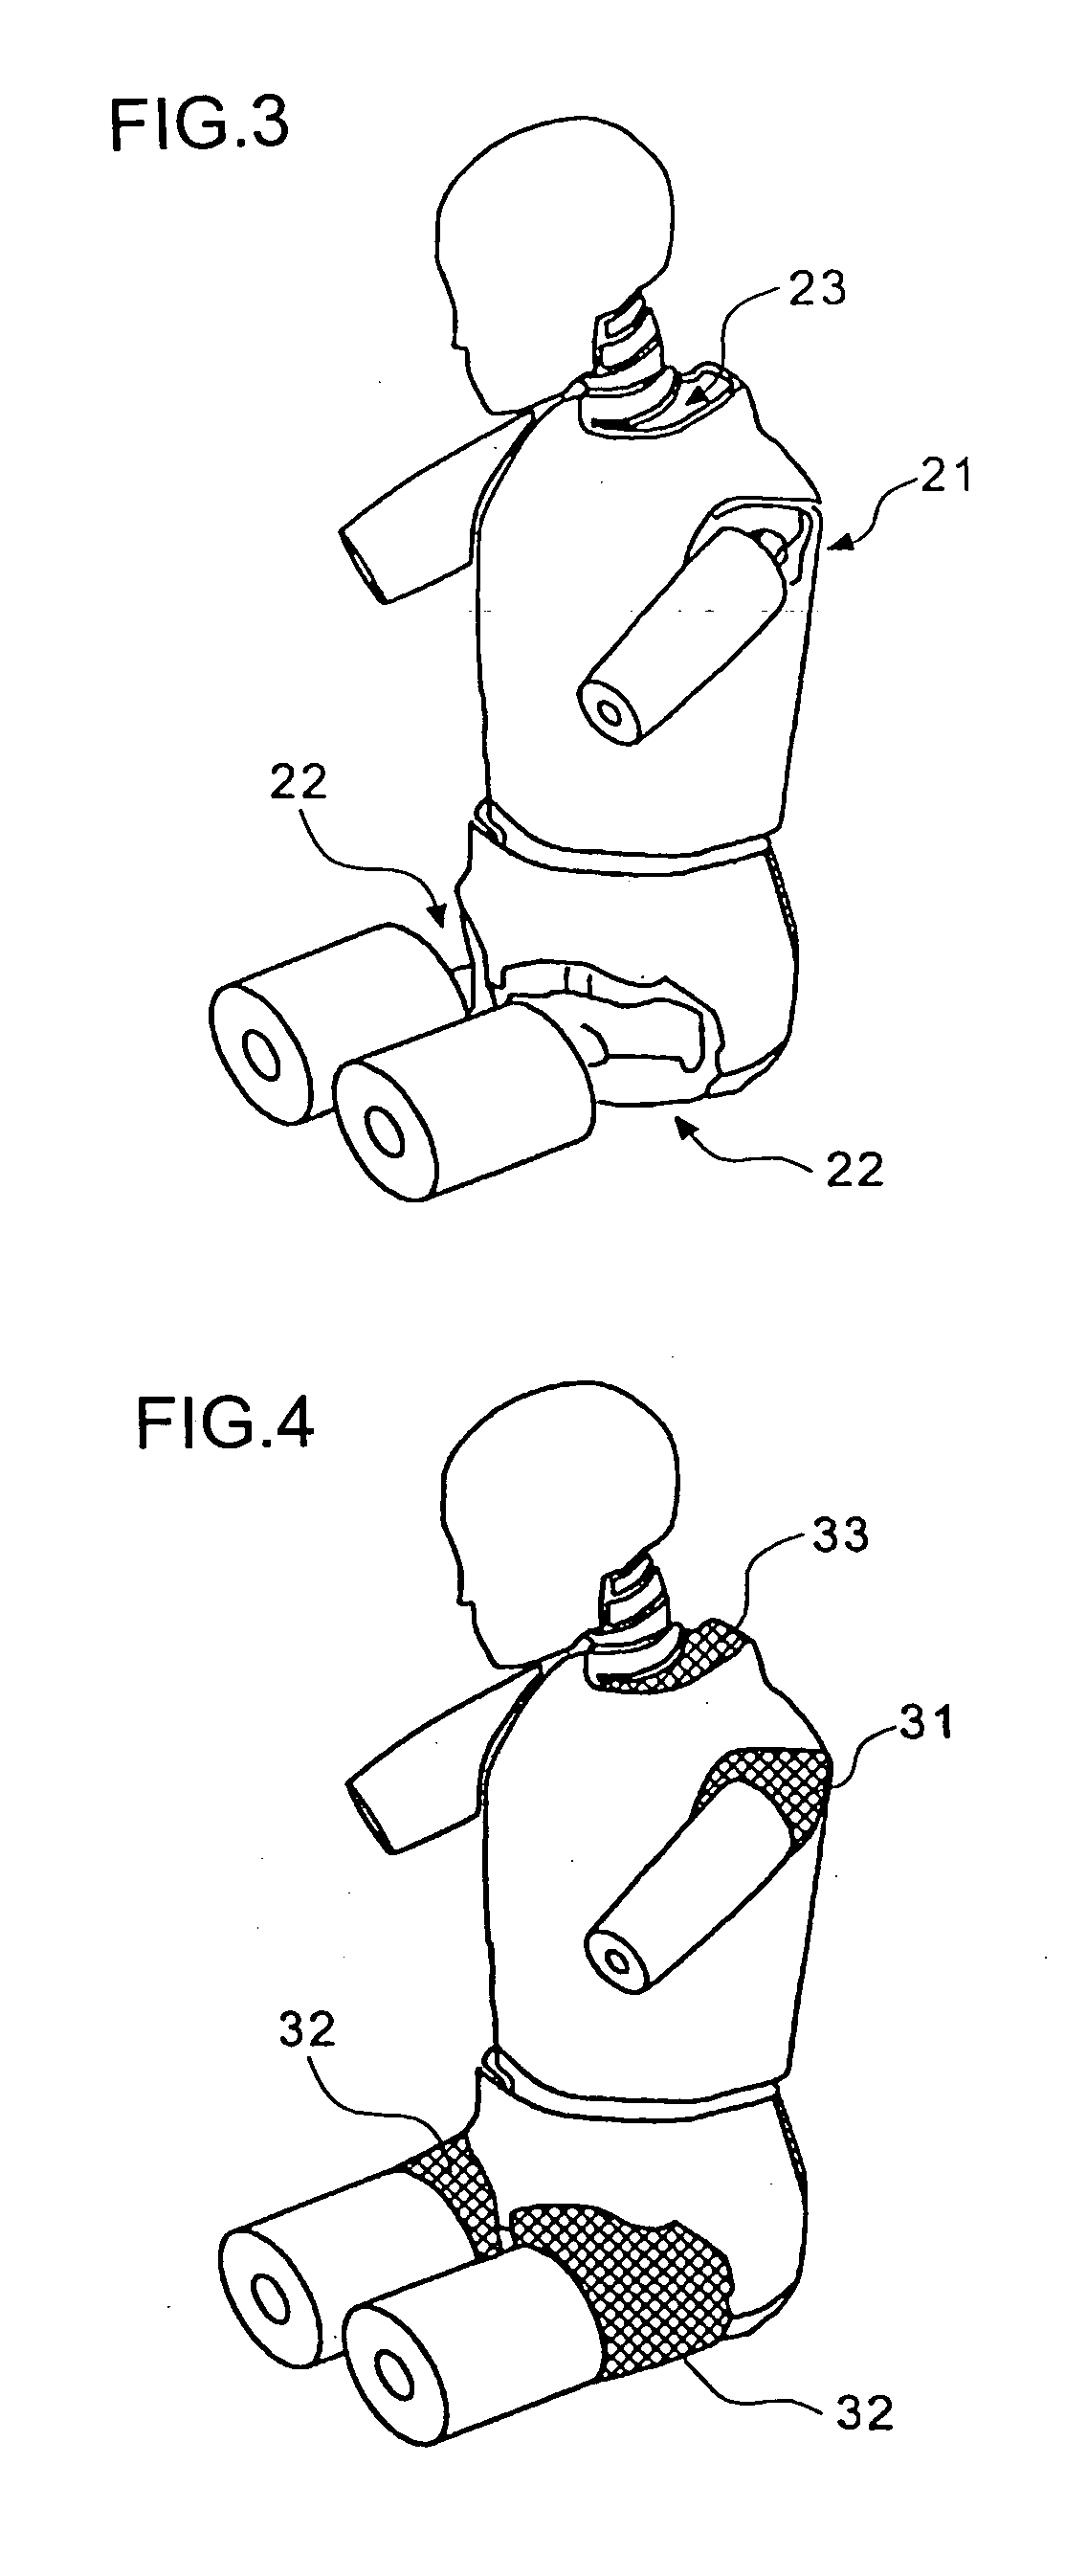 Method of generating two-wheeled vehicle dummy model and apparatus for performing a collision simulation of a two-wheeled vehicle